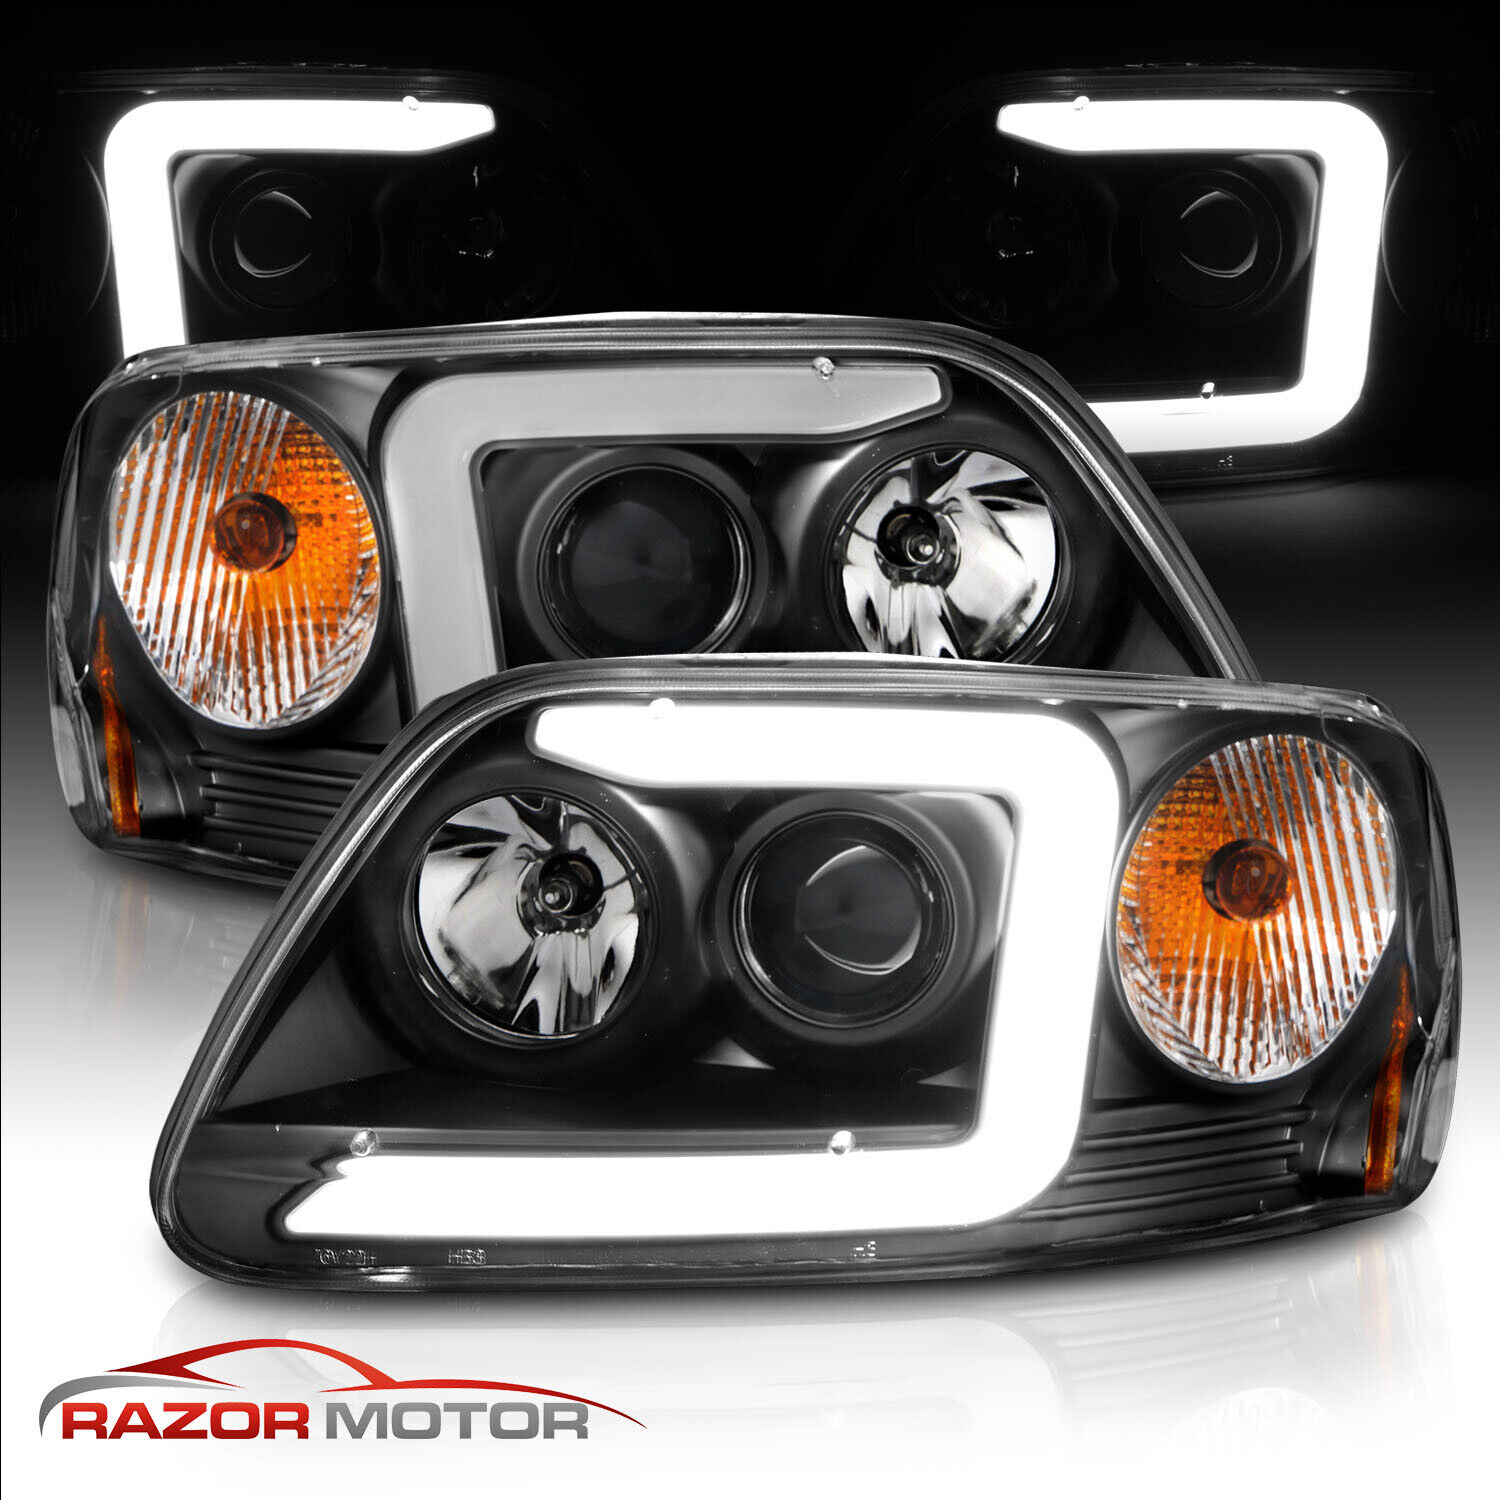 [LED C Light Bar]For 1997-2003 Ford F-150 Halo Ring Projector Black Headlights